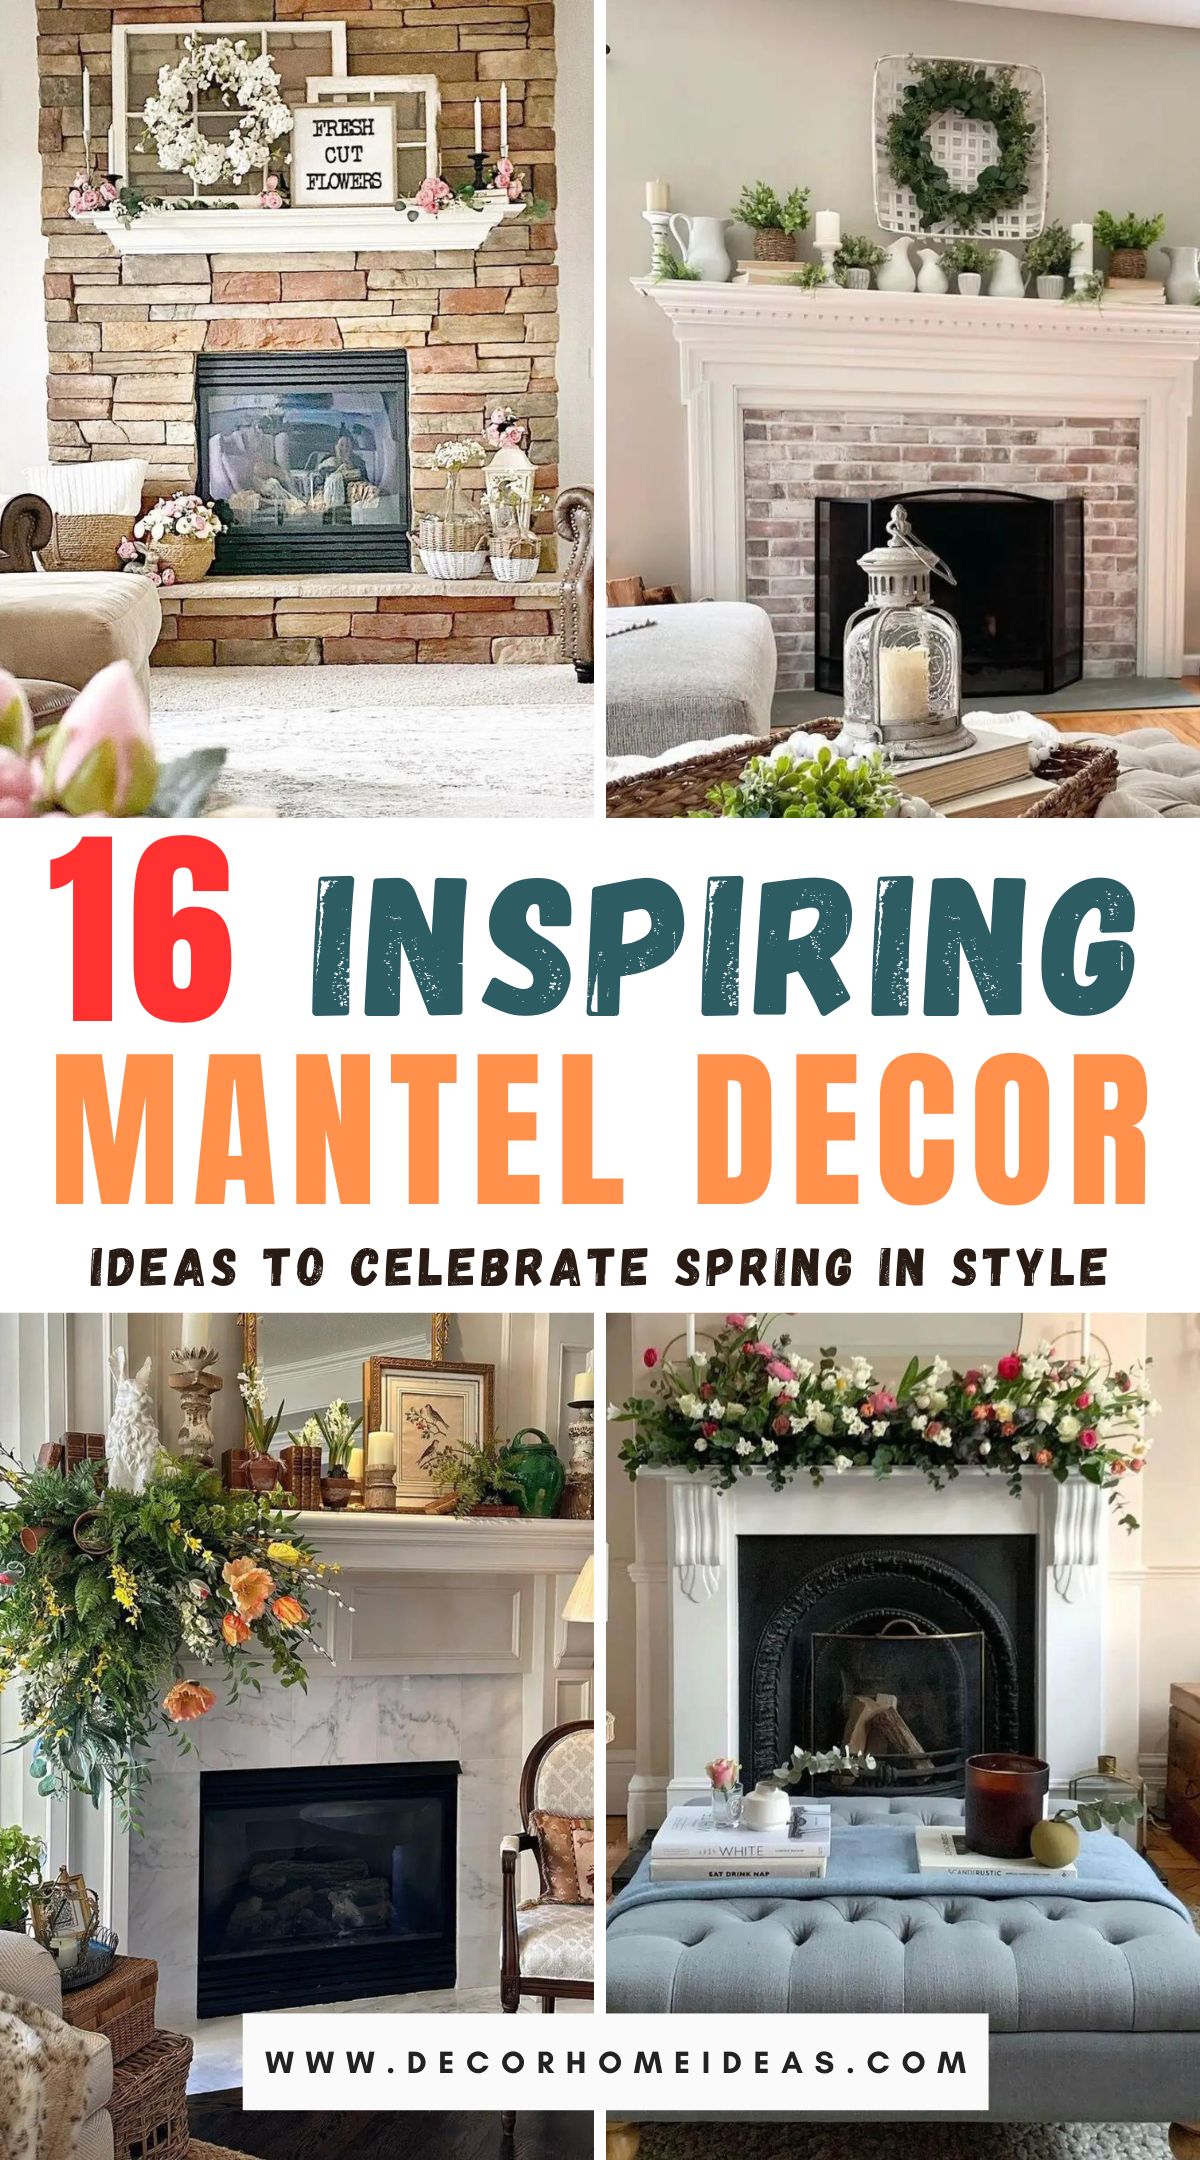 Welcome the freshness of spring into your home with these 16 inspiring ideas for mantel decorating. Explore creative ways to infuse your space with the vibrant energy and beauty of the season.